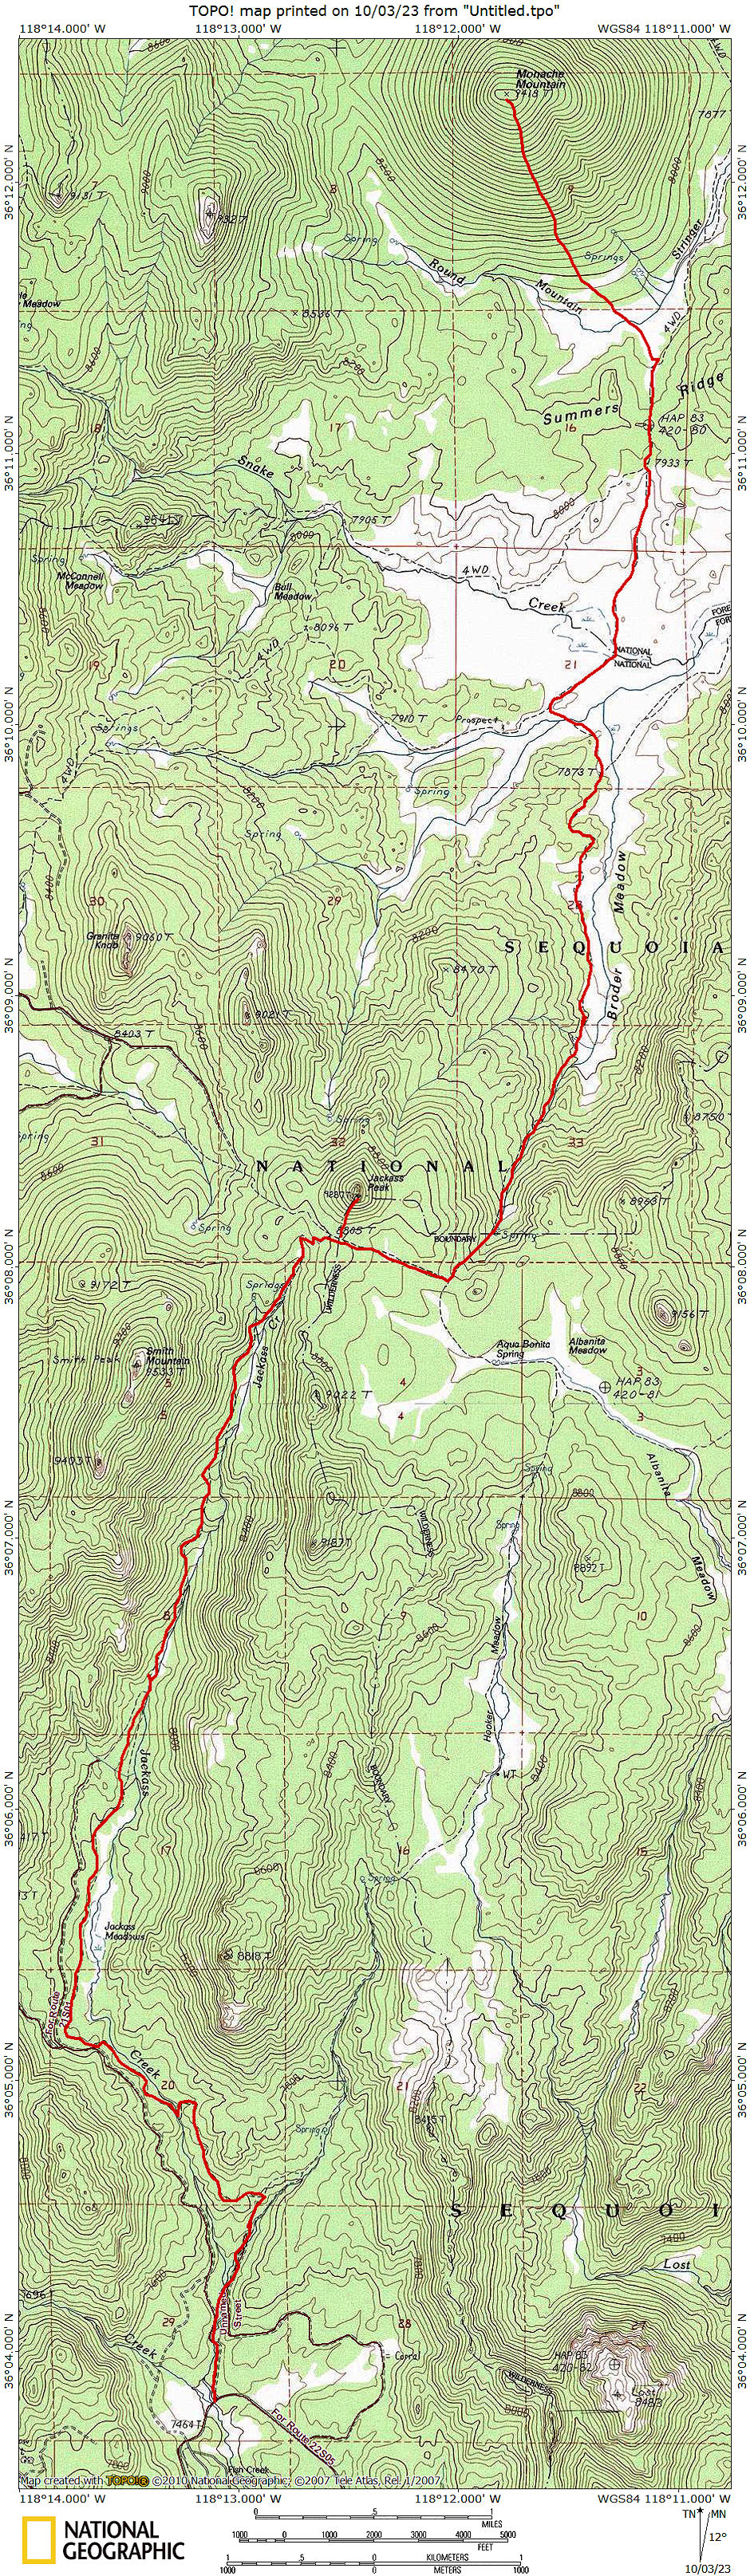 Route Map To Monanche Mountain and Jackass Peak 1969